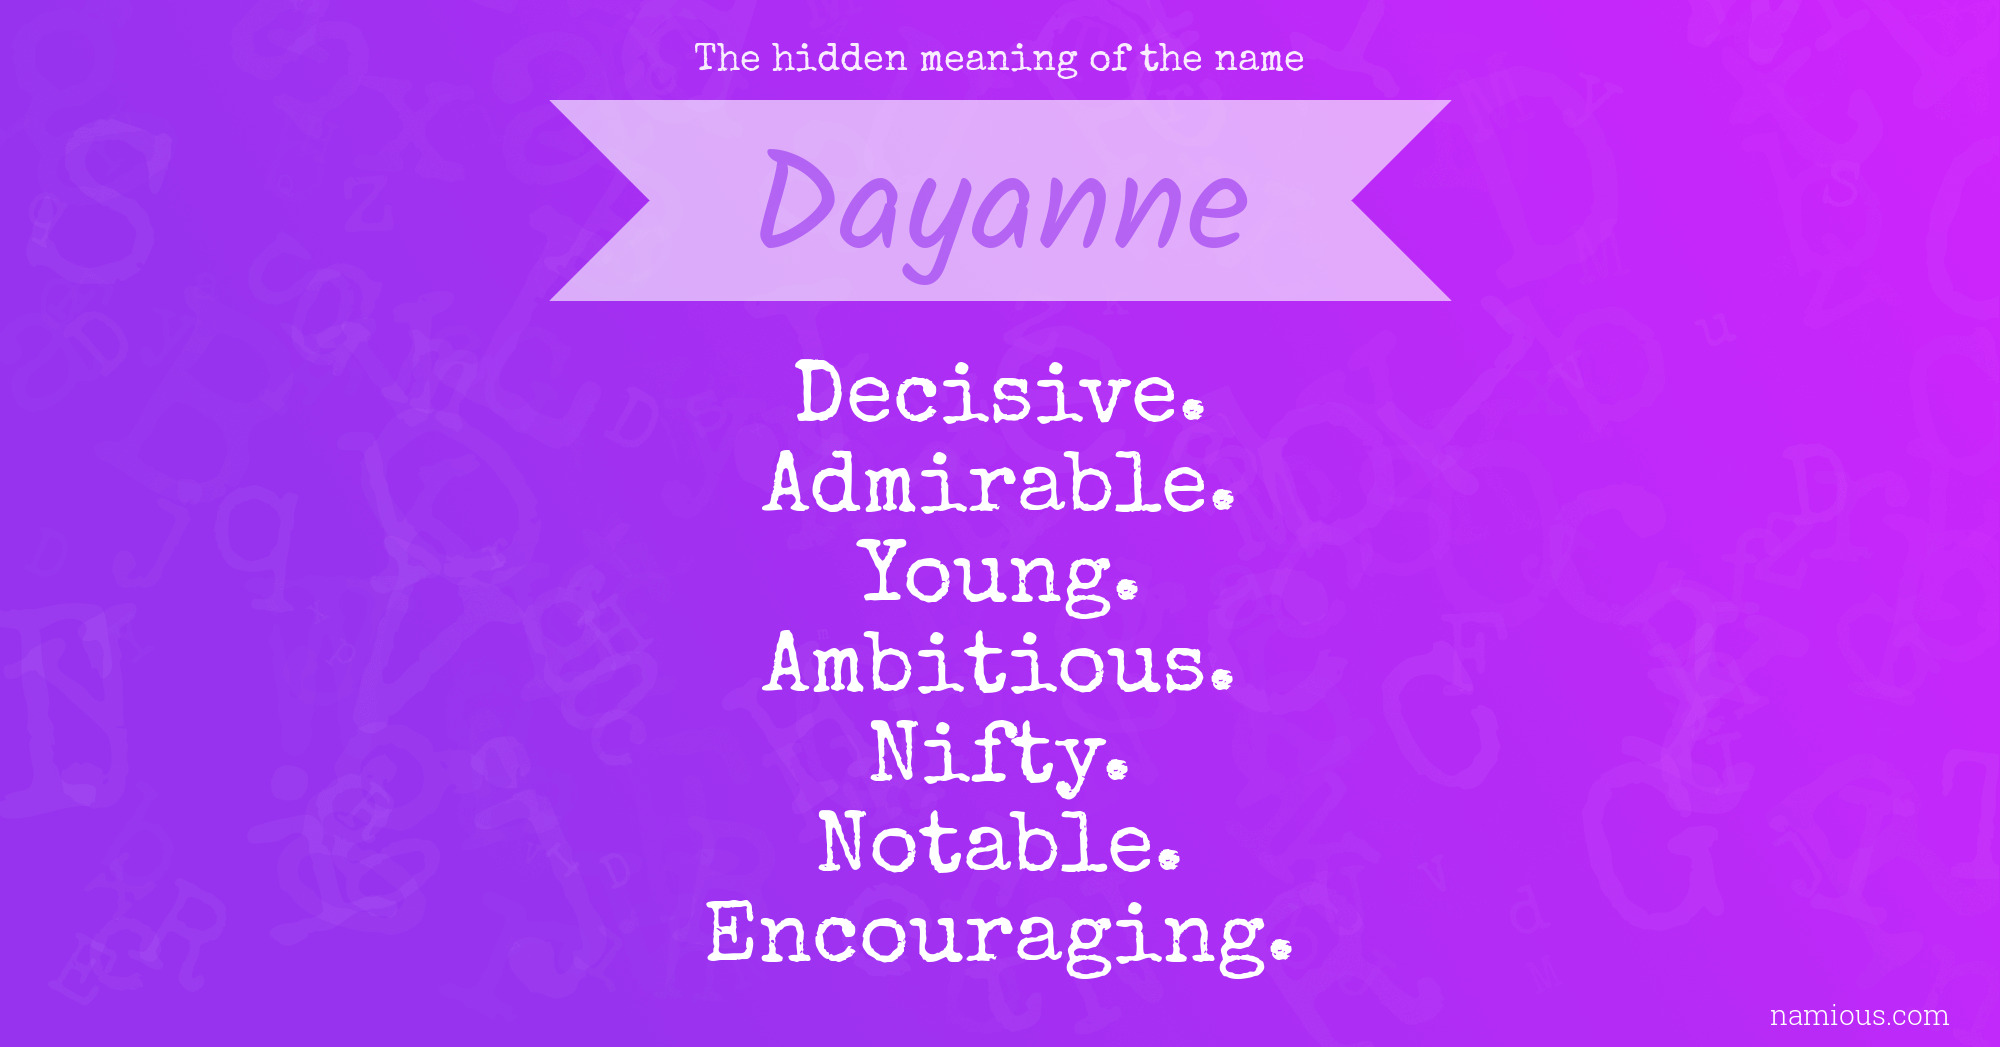 The hidden meaning of the name Dayanne